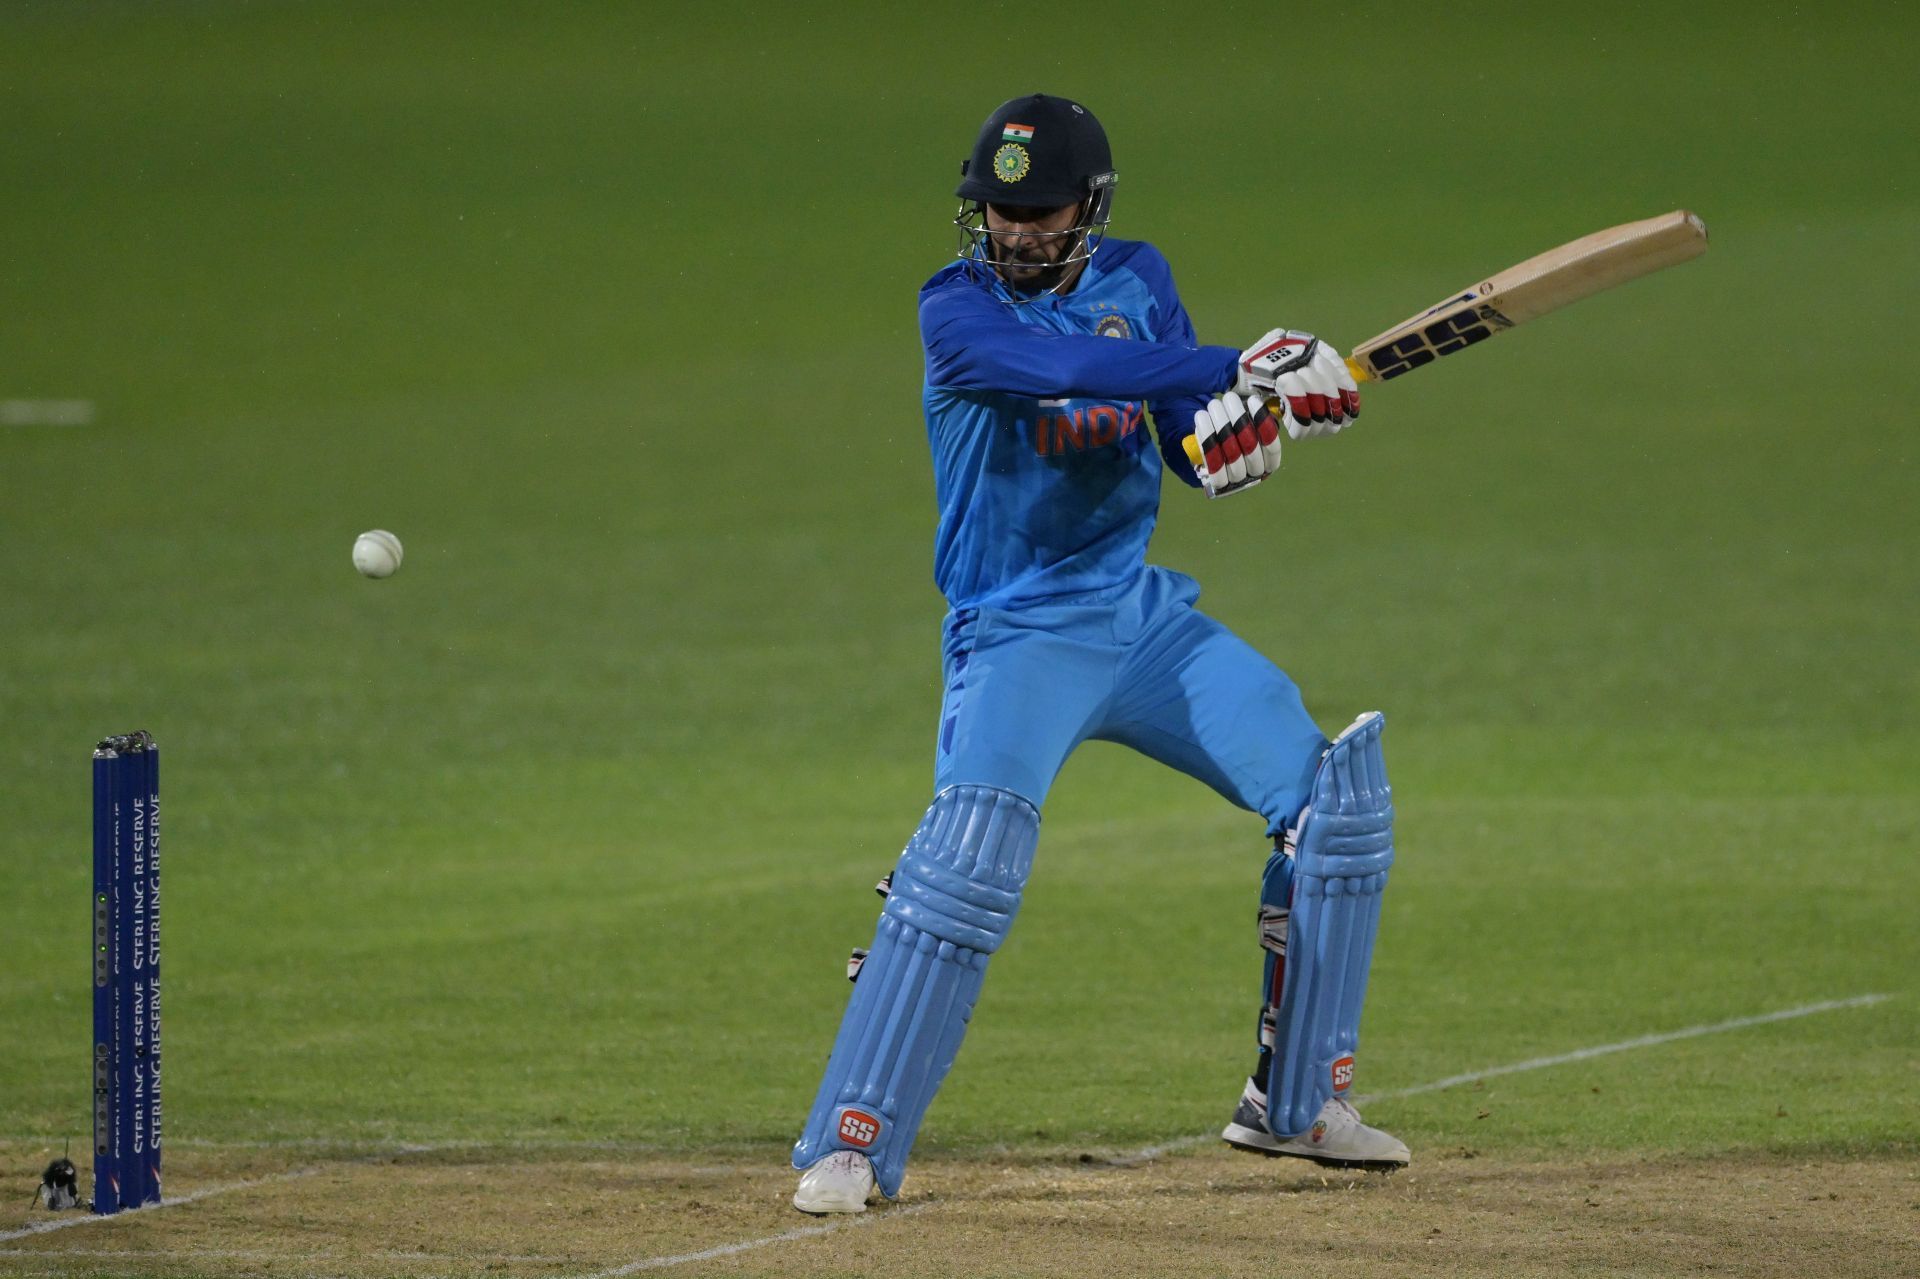 Is time running out for Deepak Hooda? Pic: Getty Images